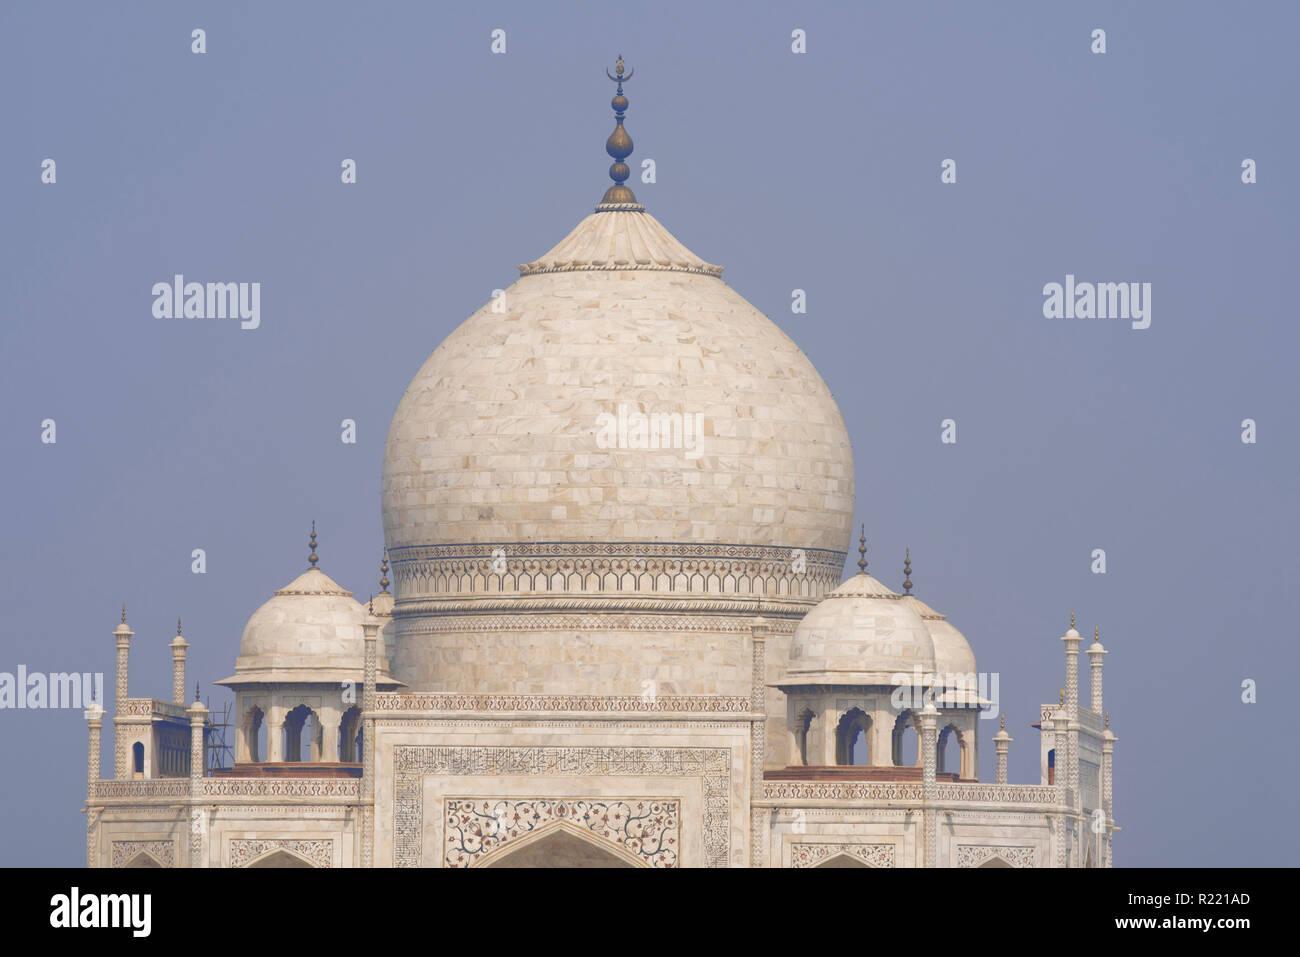 Majestic Taj Mahal the wonder of the world and the pride of India in winter morning light with its marble white main tomb and other small tombs around Stock Photo